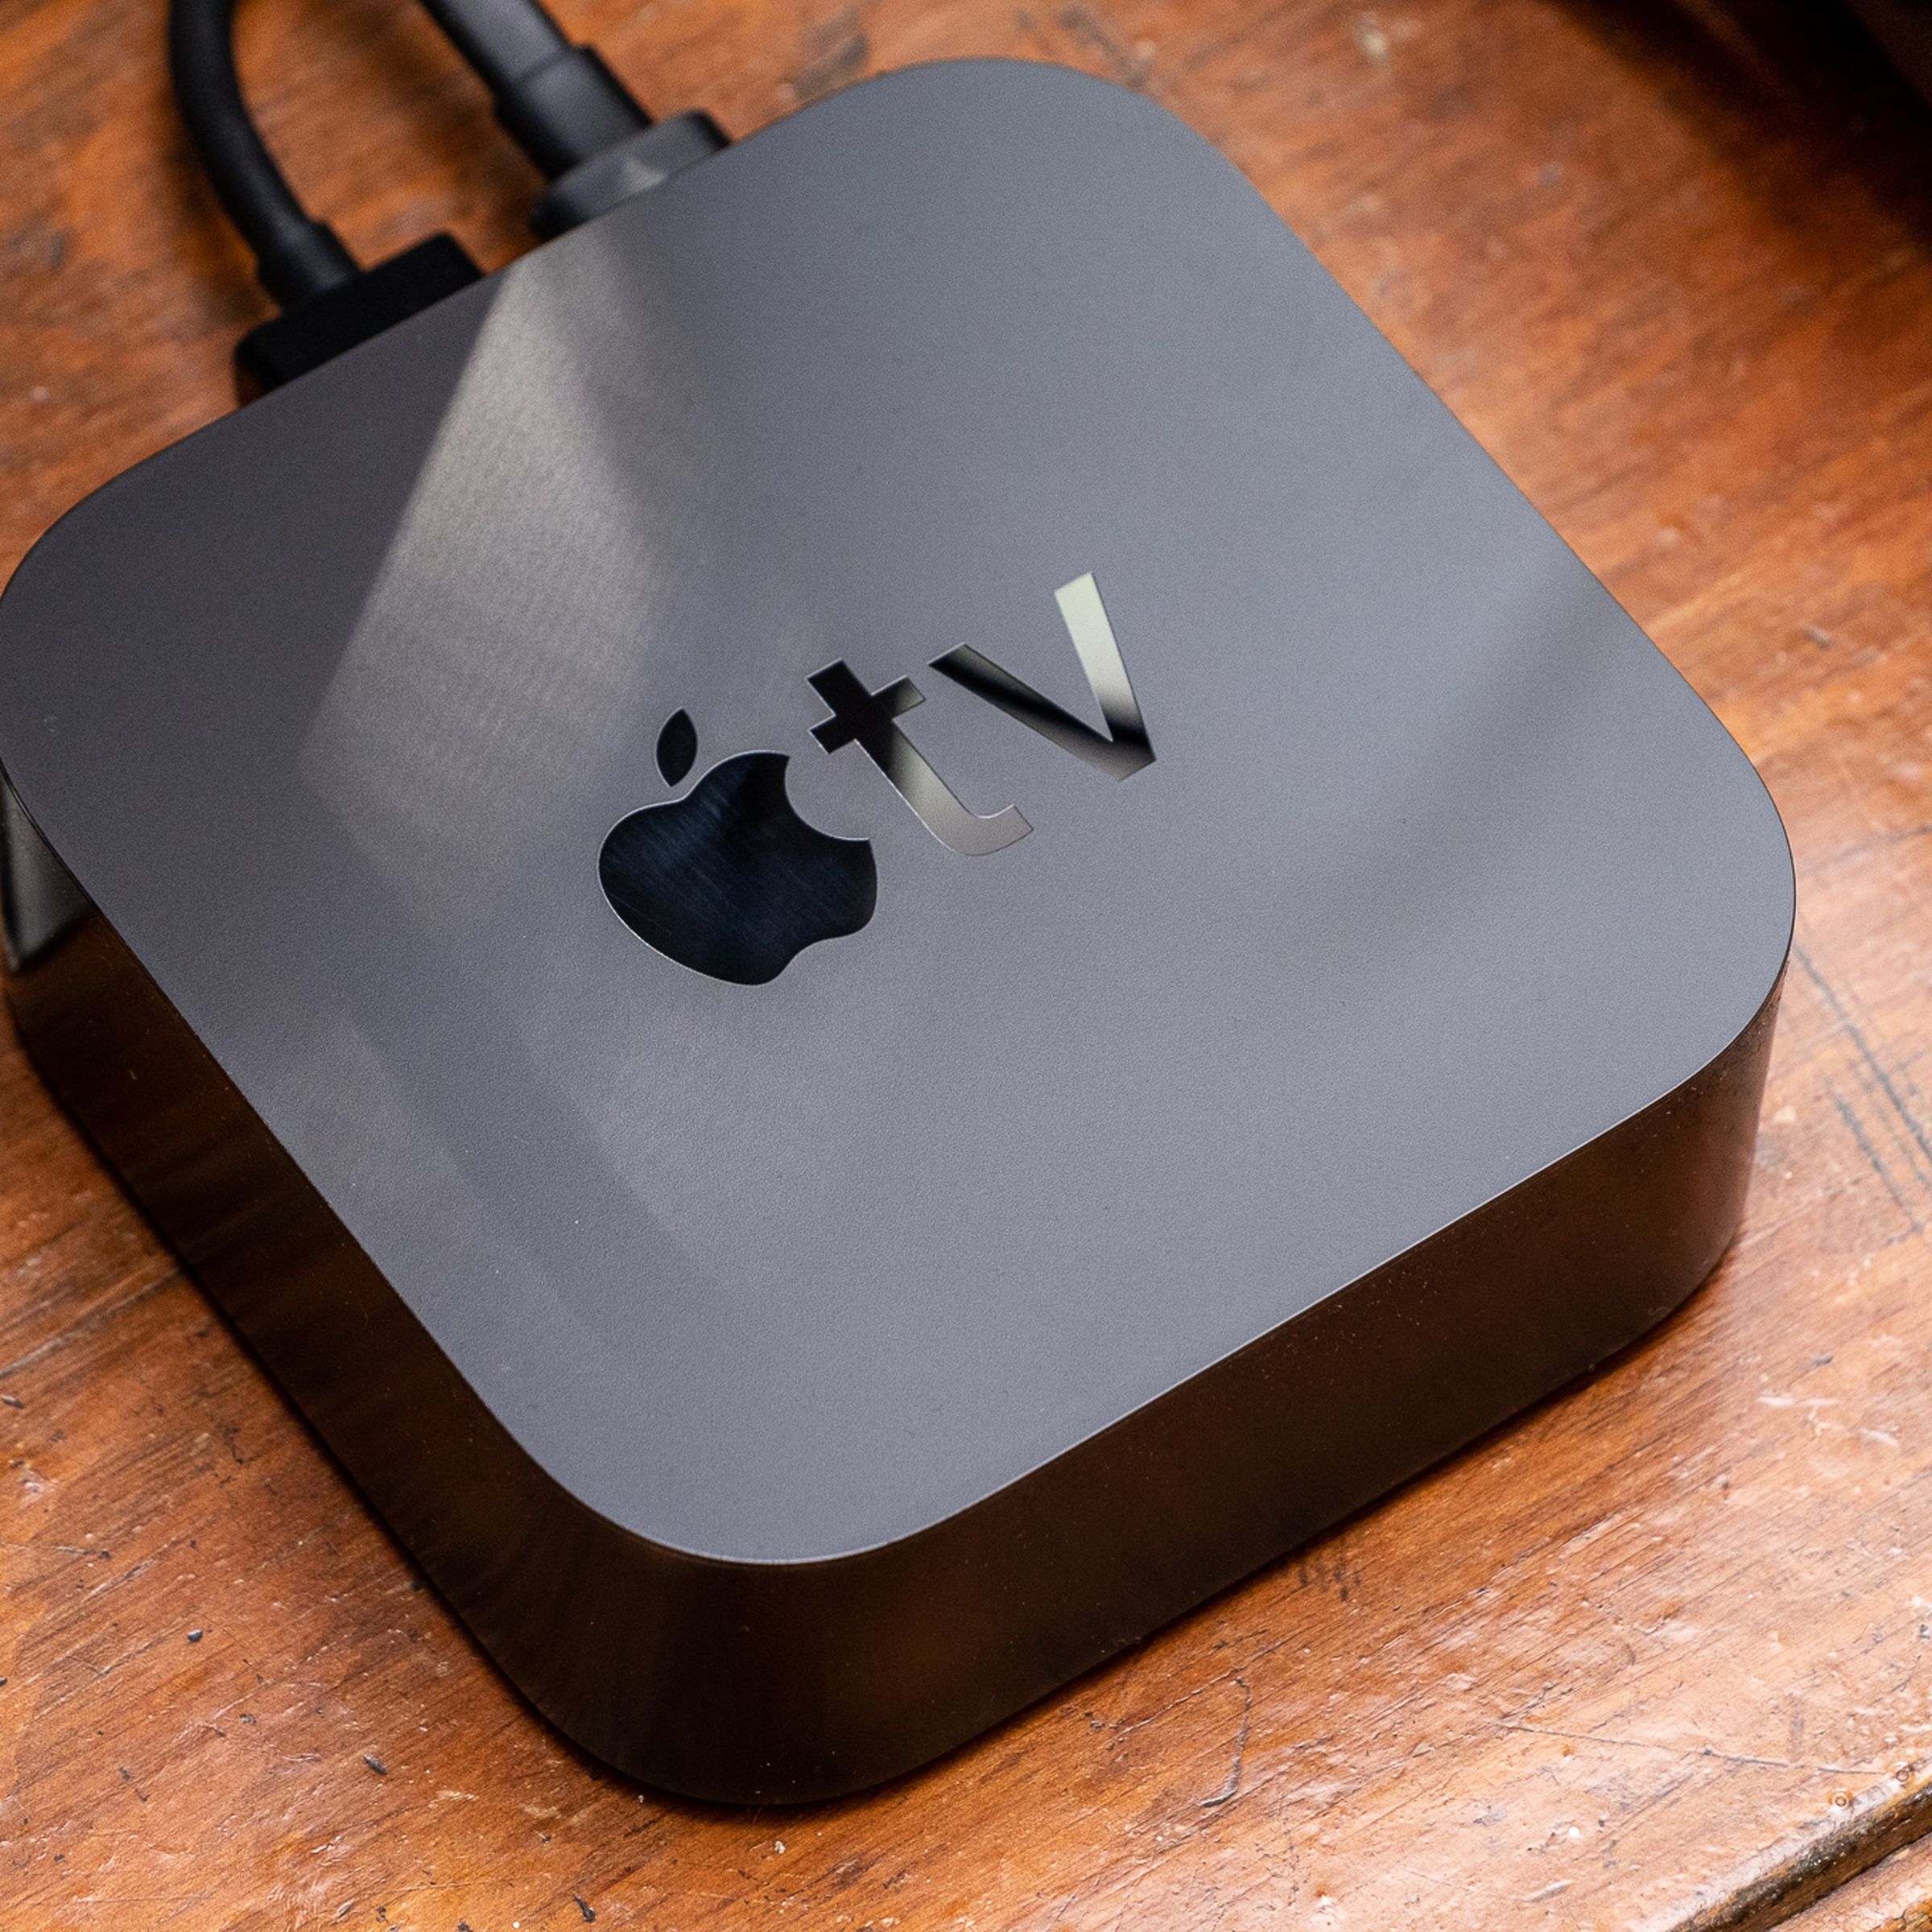 A photo of the Apple TV 4K set on top of a brown wooden surface.